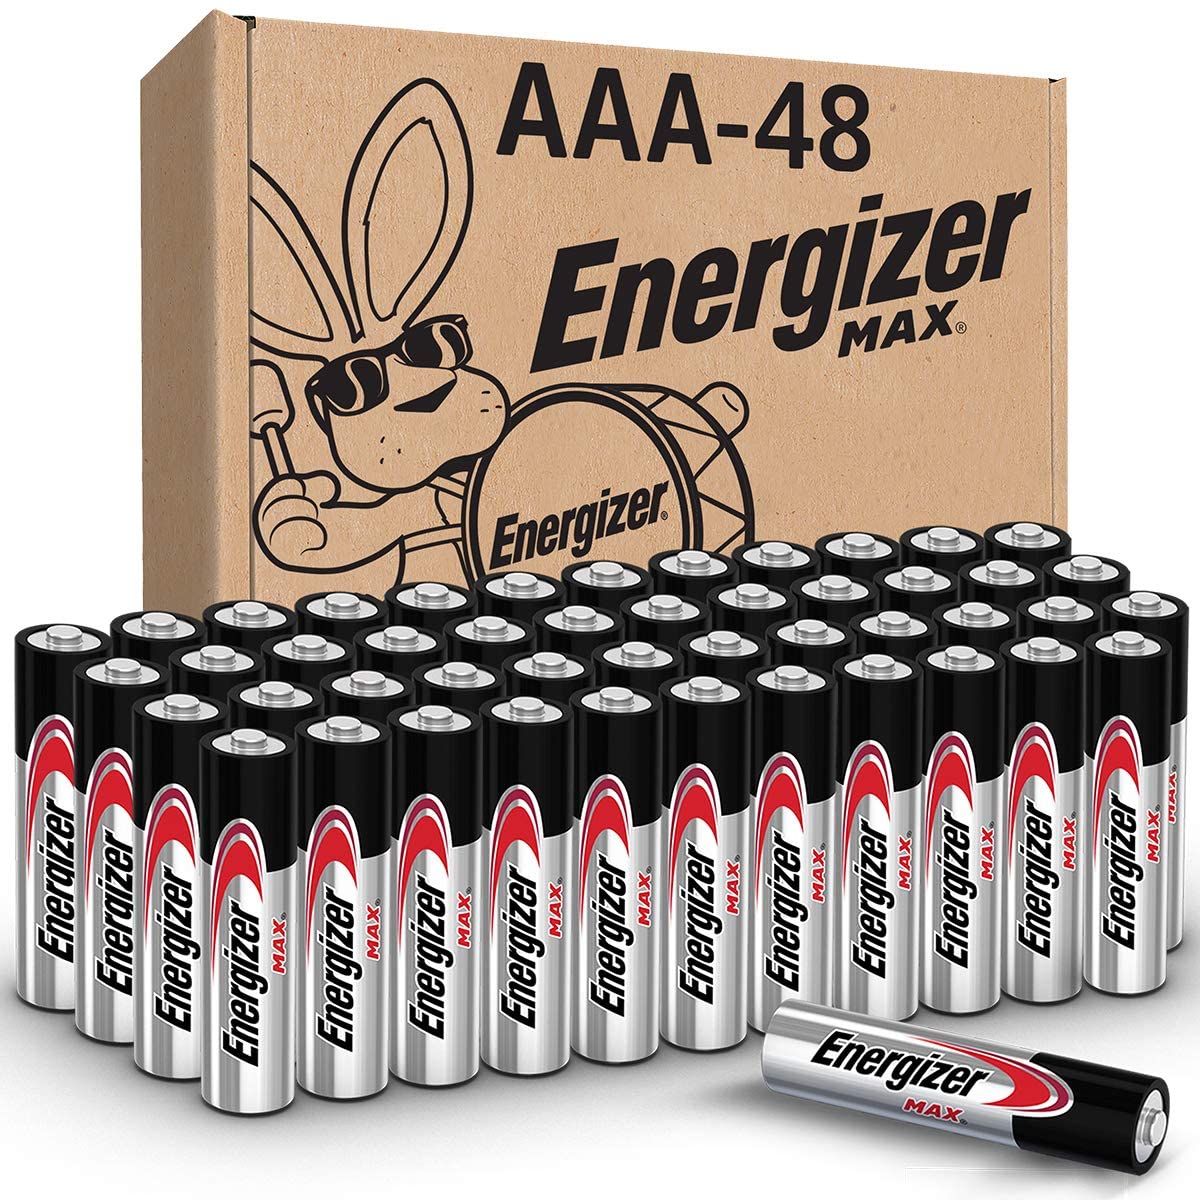 Energizer Max Leakproof AAA Batteries, 48-Count